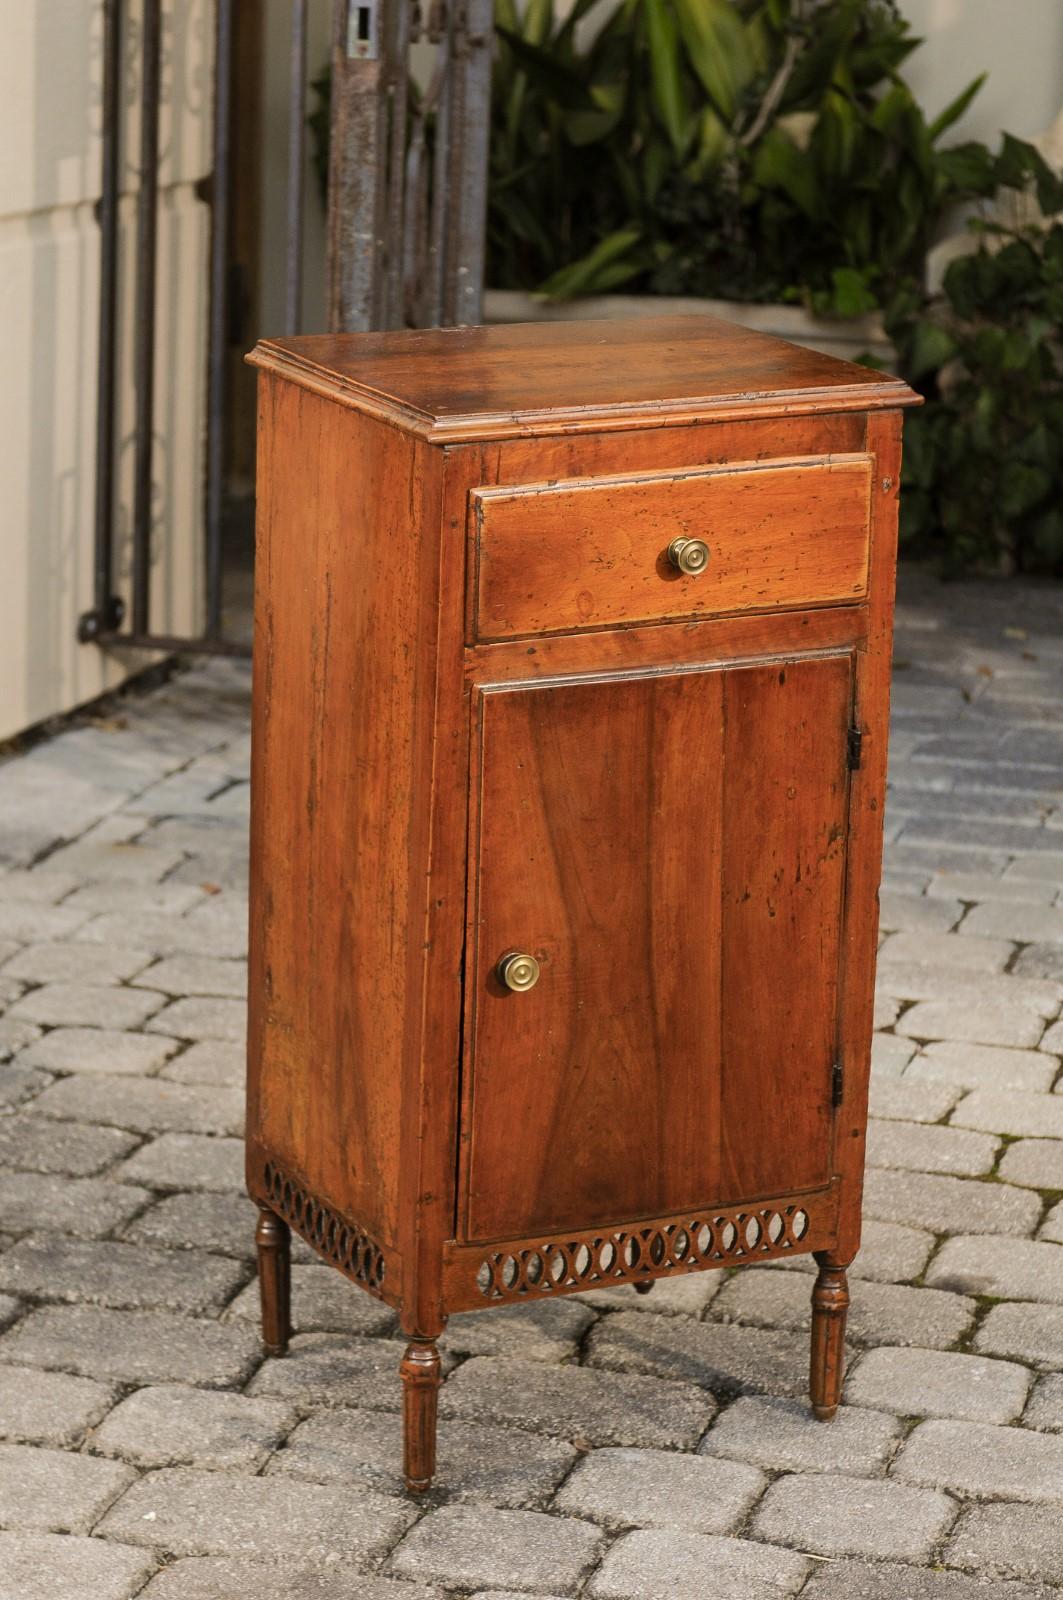 A French Napoleon III period walnut nightstand cabinet from the mid-19th century, with single drawer, door and pierced gallery. Born in France during the early years of emperor Napoleon III's reign, this charming nightstand table features a